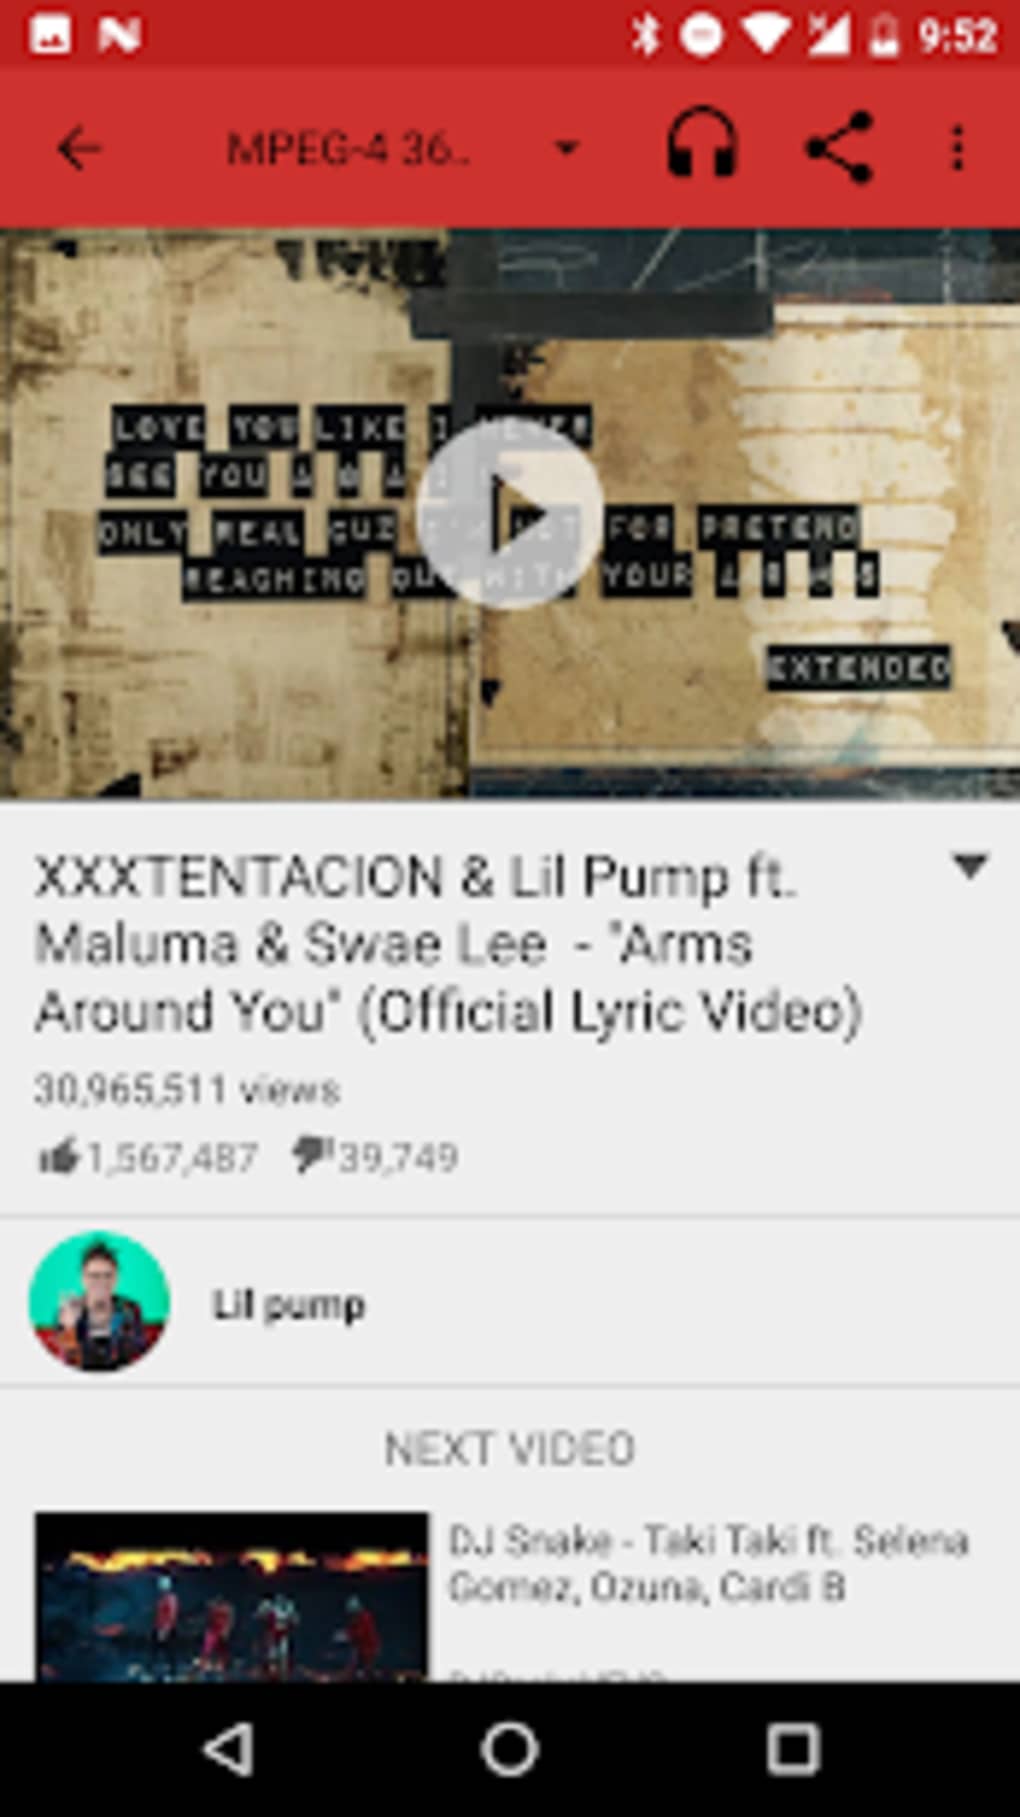 Xxxtentacion All Songs Apk For Android Download